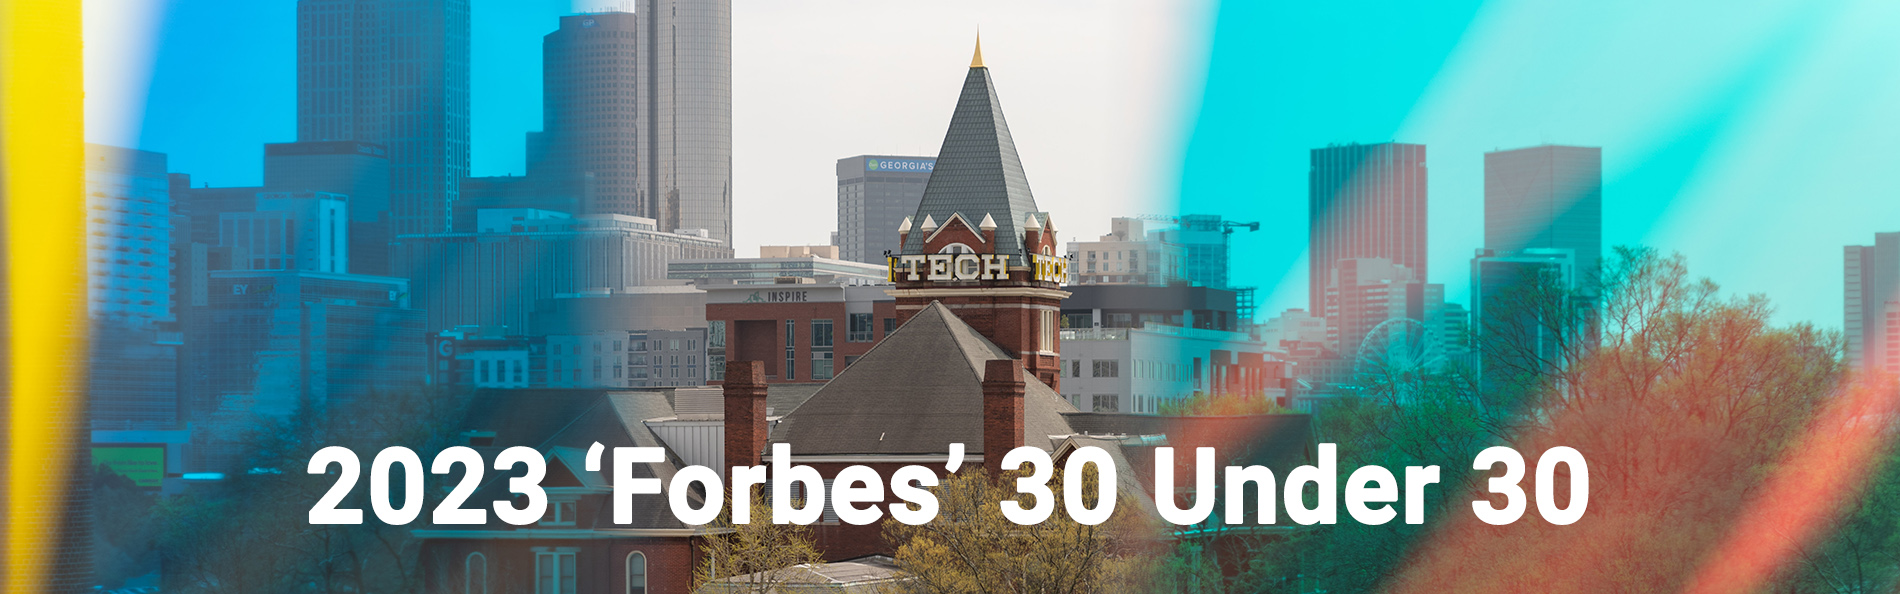 forbes banner